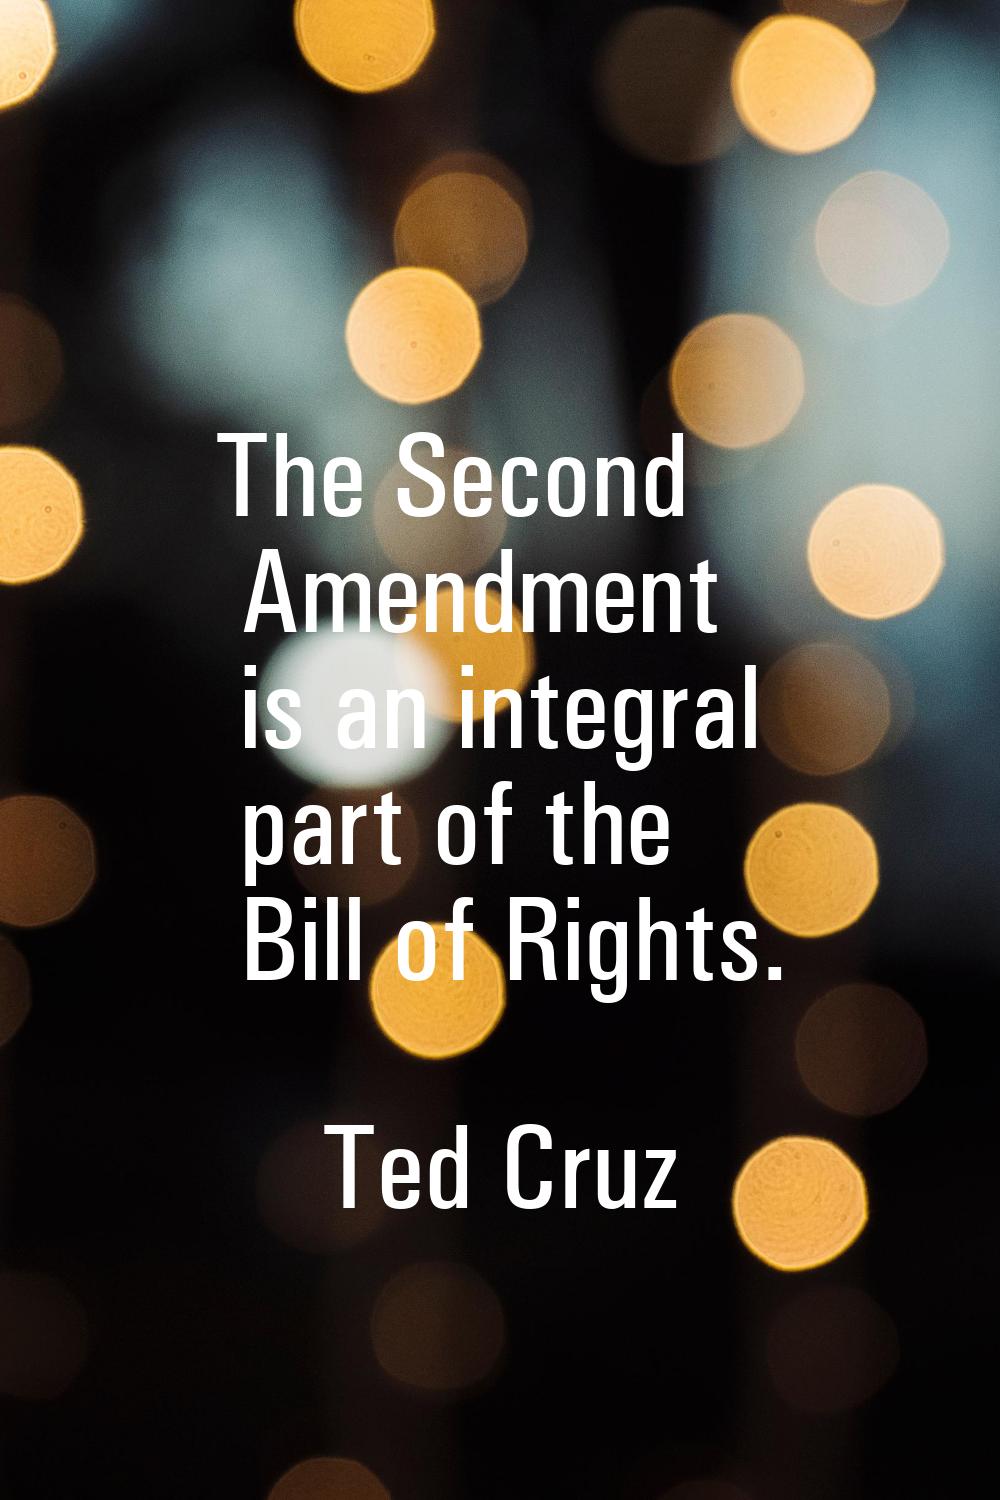 The Second Amendment is an integral part of the Bill of Rights.